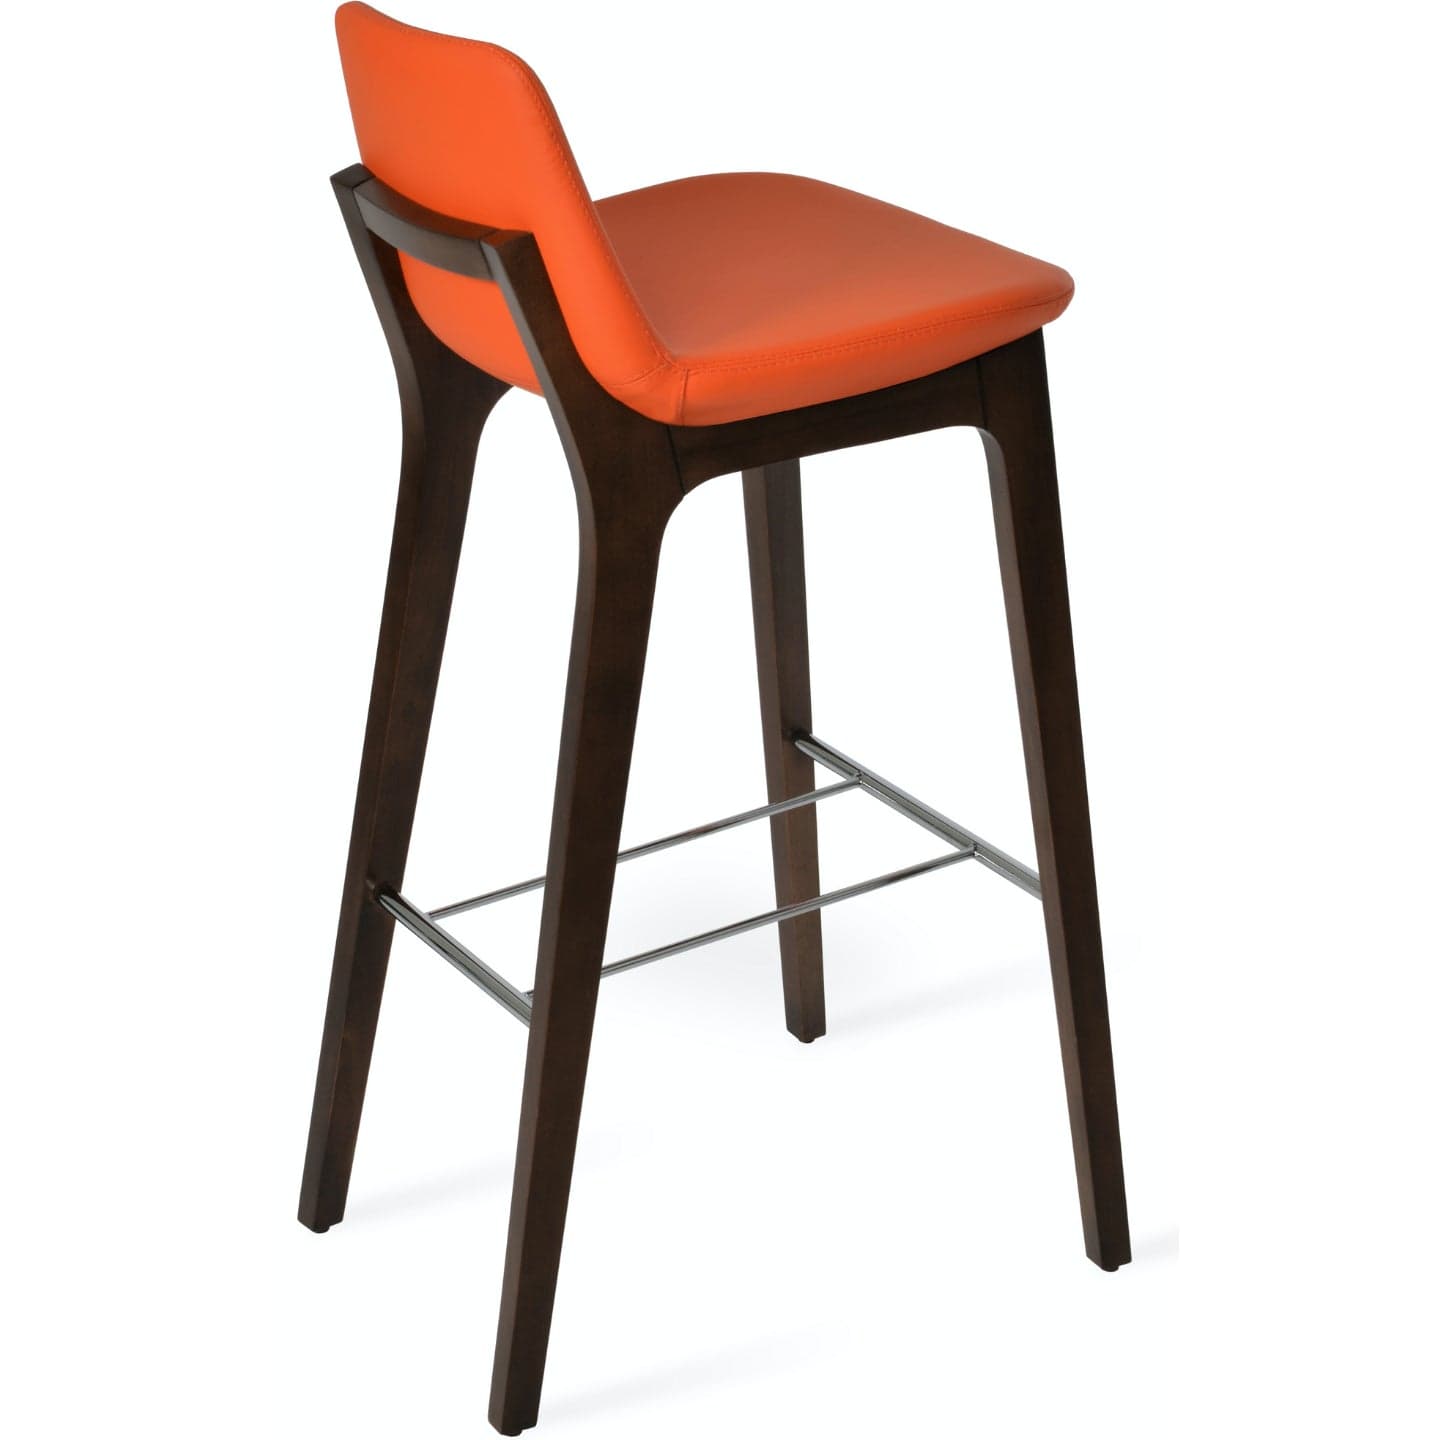 Soho Concept pera-wood-handle-back-wood-base-faux-leather-seat-kitchen-counter-stool-in-mint